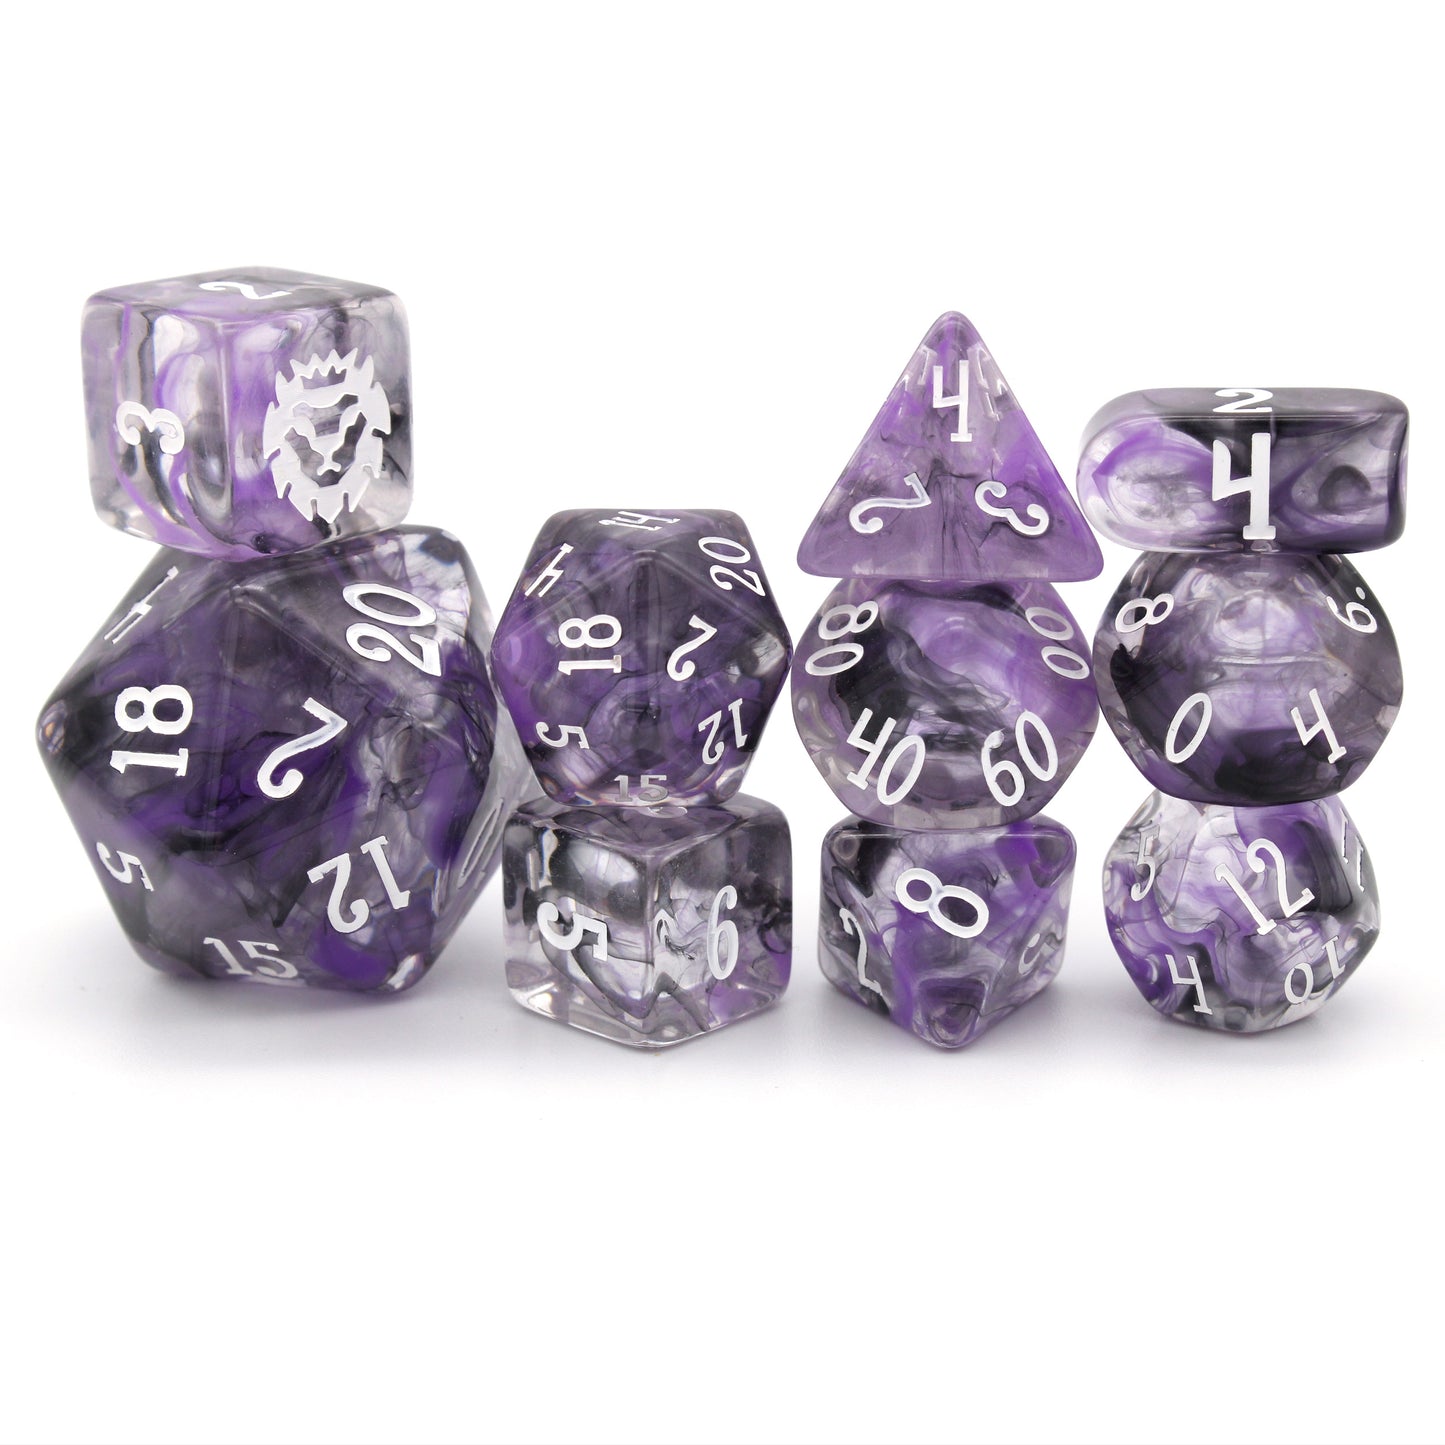 Night Mom is a 10-piece set with purple and black vapor suspended in clear resin with white ink for easy readability.